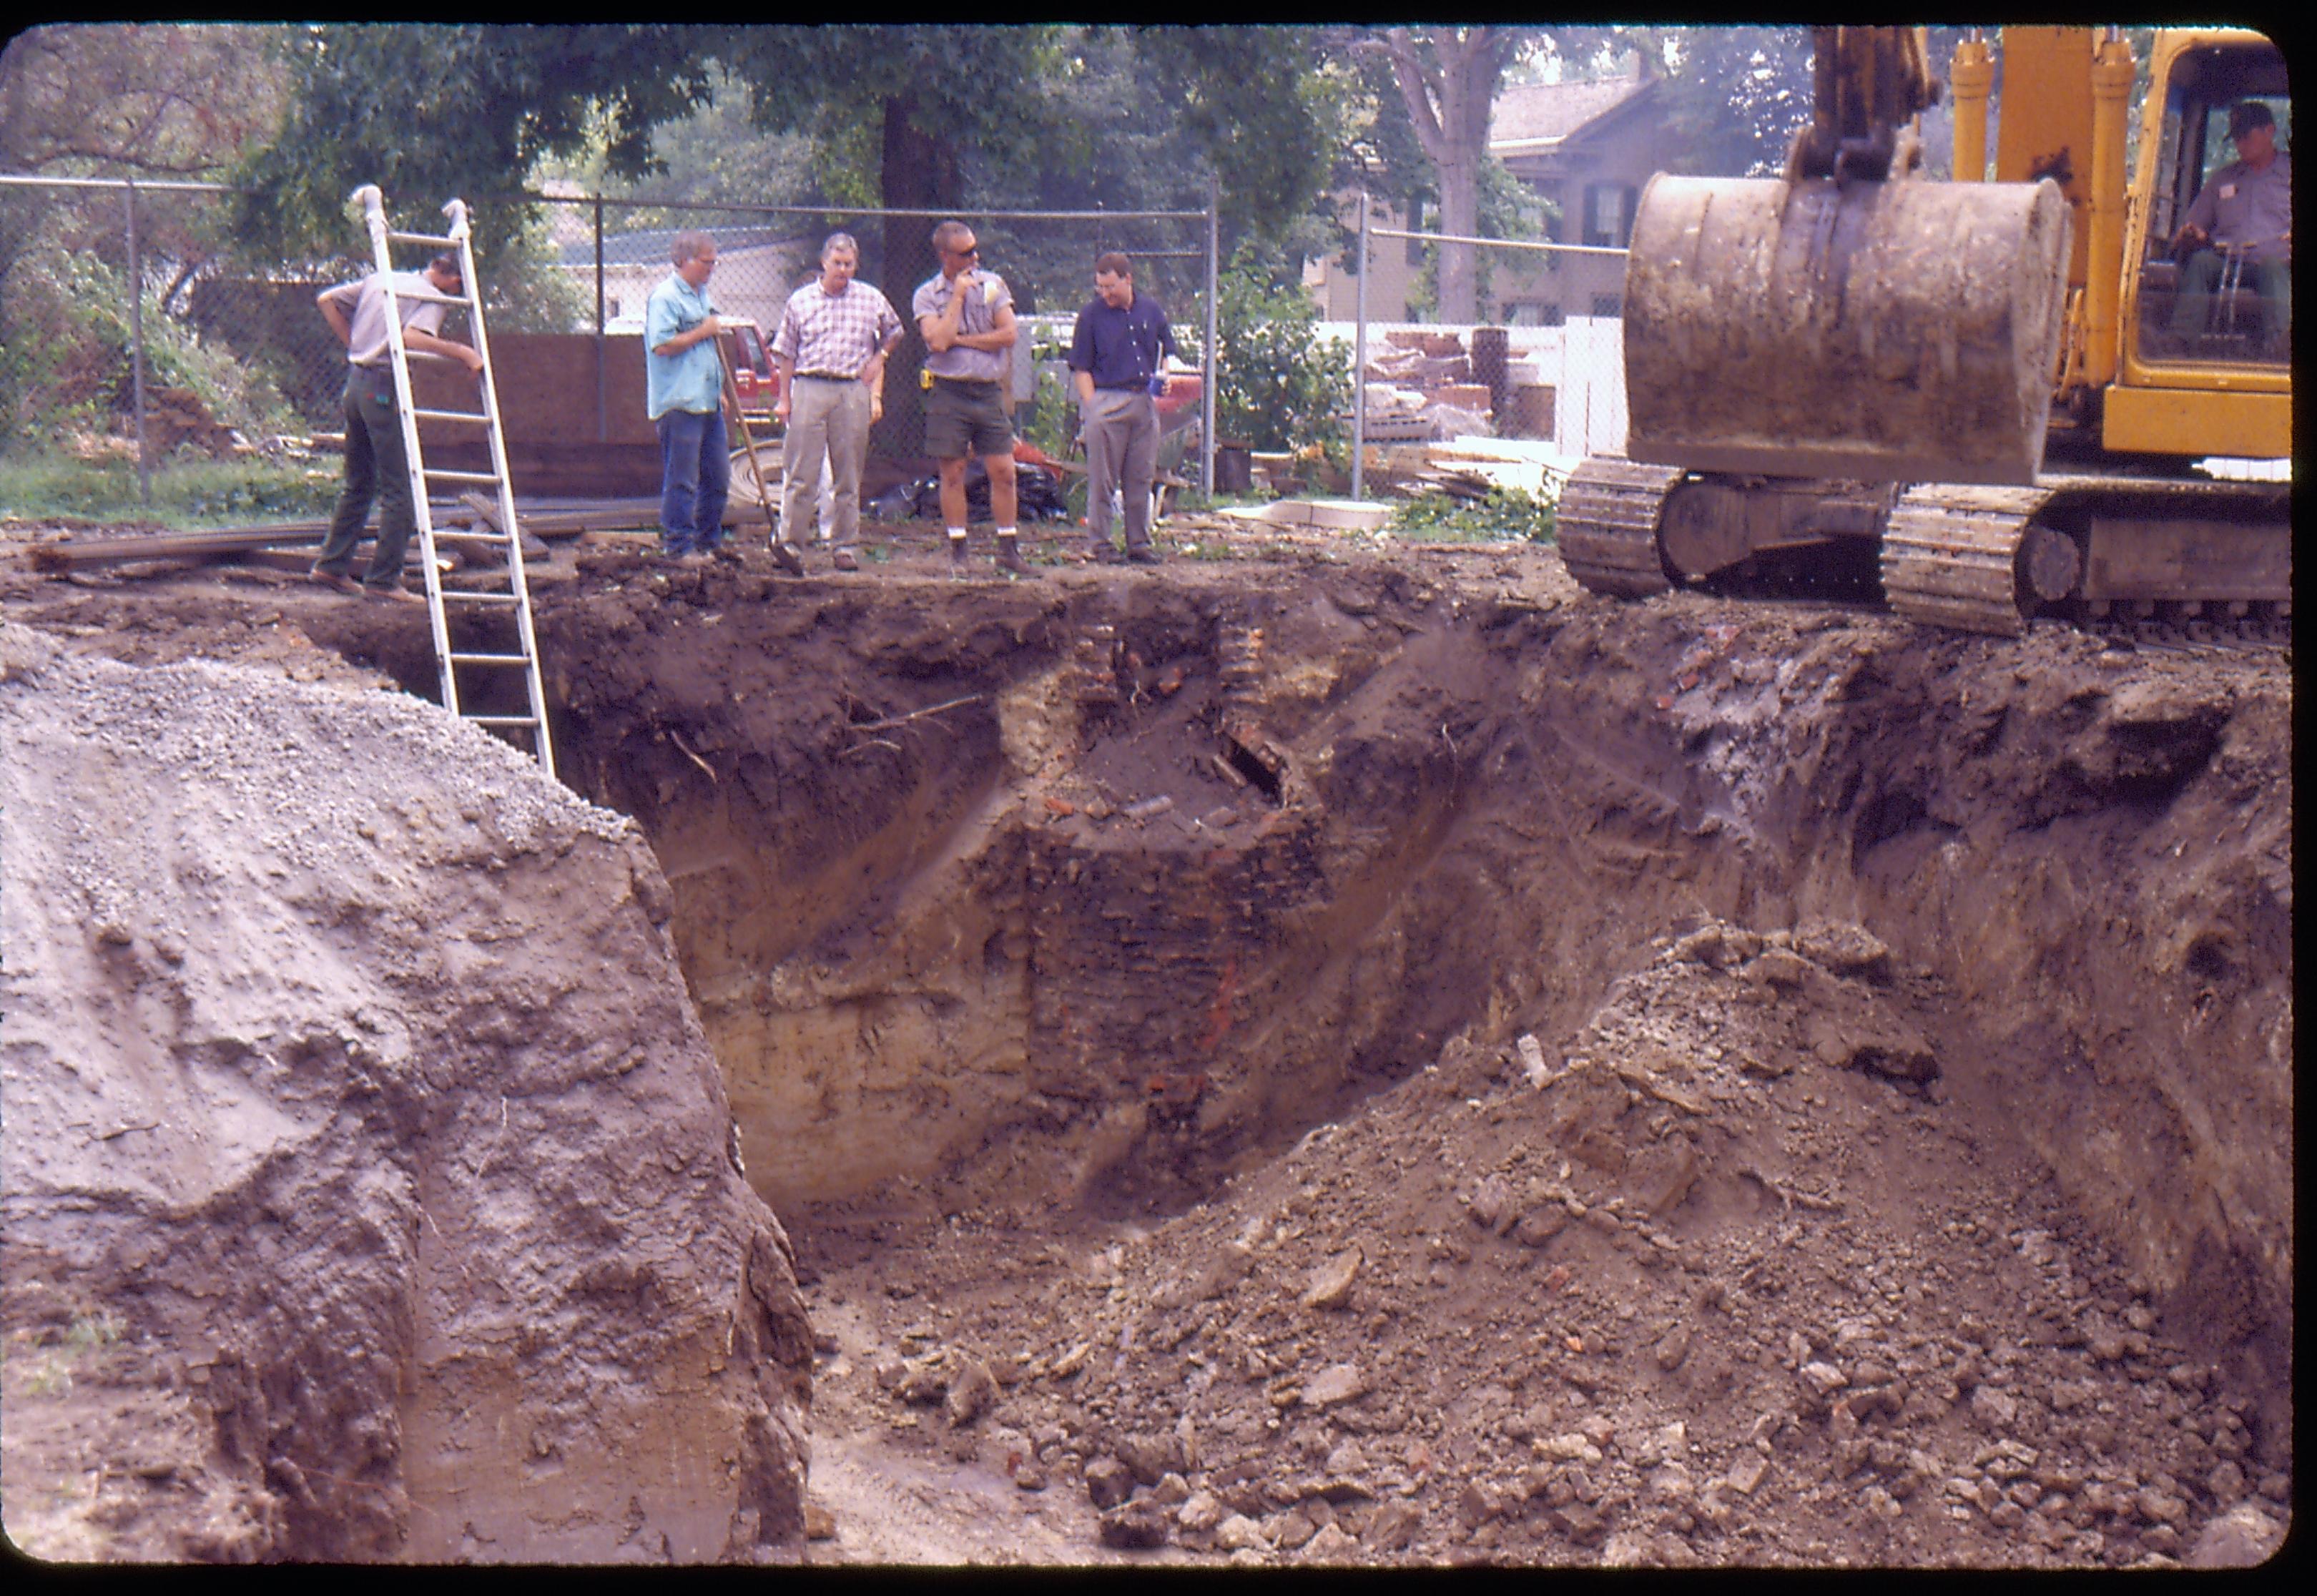 Morse - Basement excavation (cistern found). Maintenance worker Doug Sharp leans on ladder, Fever River Archeologist Floyd Mansberger (with shovel), Supt. Norman Hellmers, Maintenance Worker Ed Smith and Historian Tim Townsend watch as Maintenance Worker Vee Pollack works back hoe. Brick cistern is revealed in center.  Lincoln Home in background right. B-2 in background center left. Looking South/Southeast from Morse lot (Block 10, Lots 15-16) Morse, foundation, cistern, archeology, staff, Lincoln Home, B-2, backhoe, Fever River